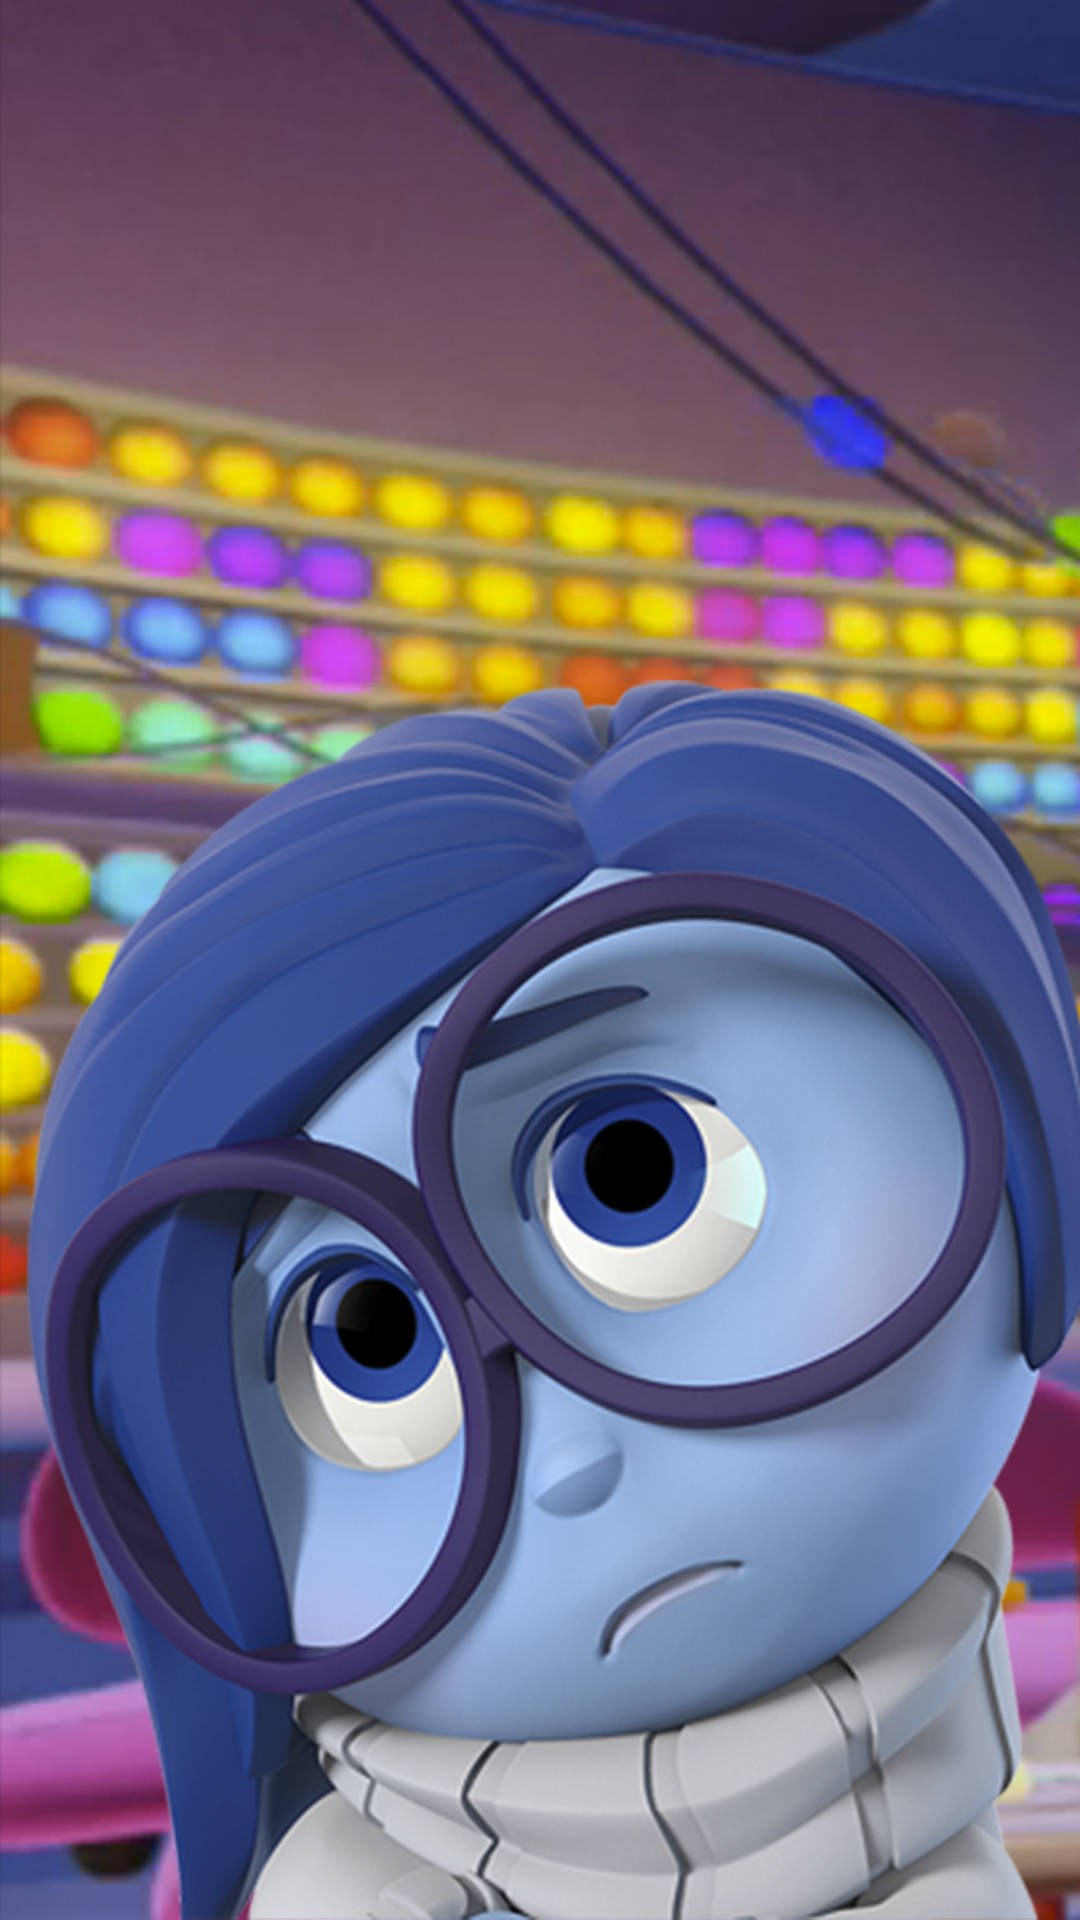 Sadness From Disney Pixar's Inside Out Feeling Overwhelmed. Background